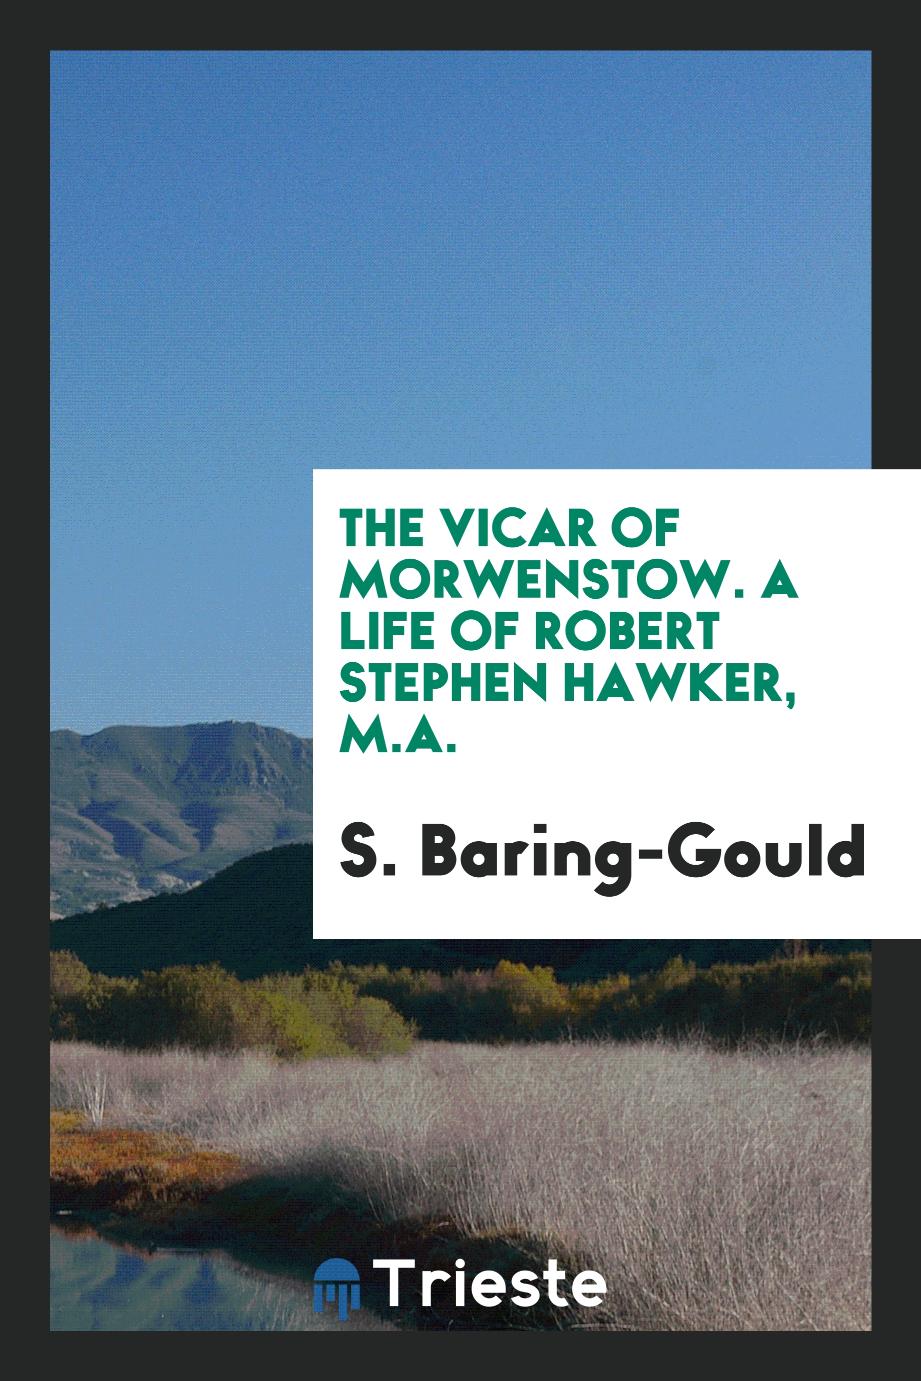 The Vicar of Morwenstow. A Life of Robert Stephen Hawker, M.A.